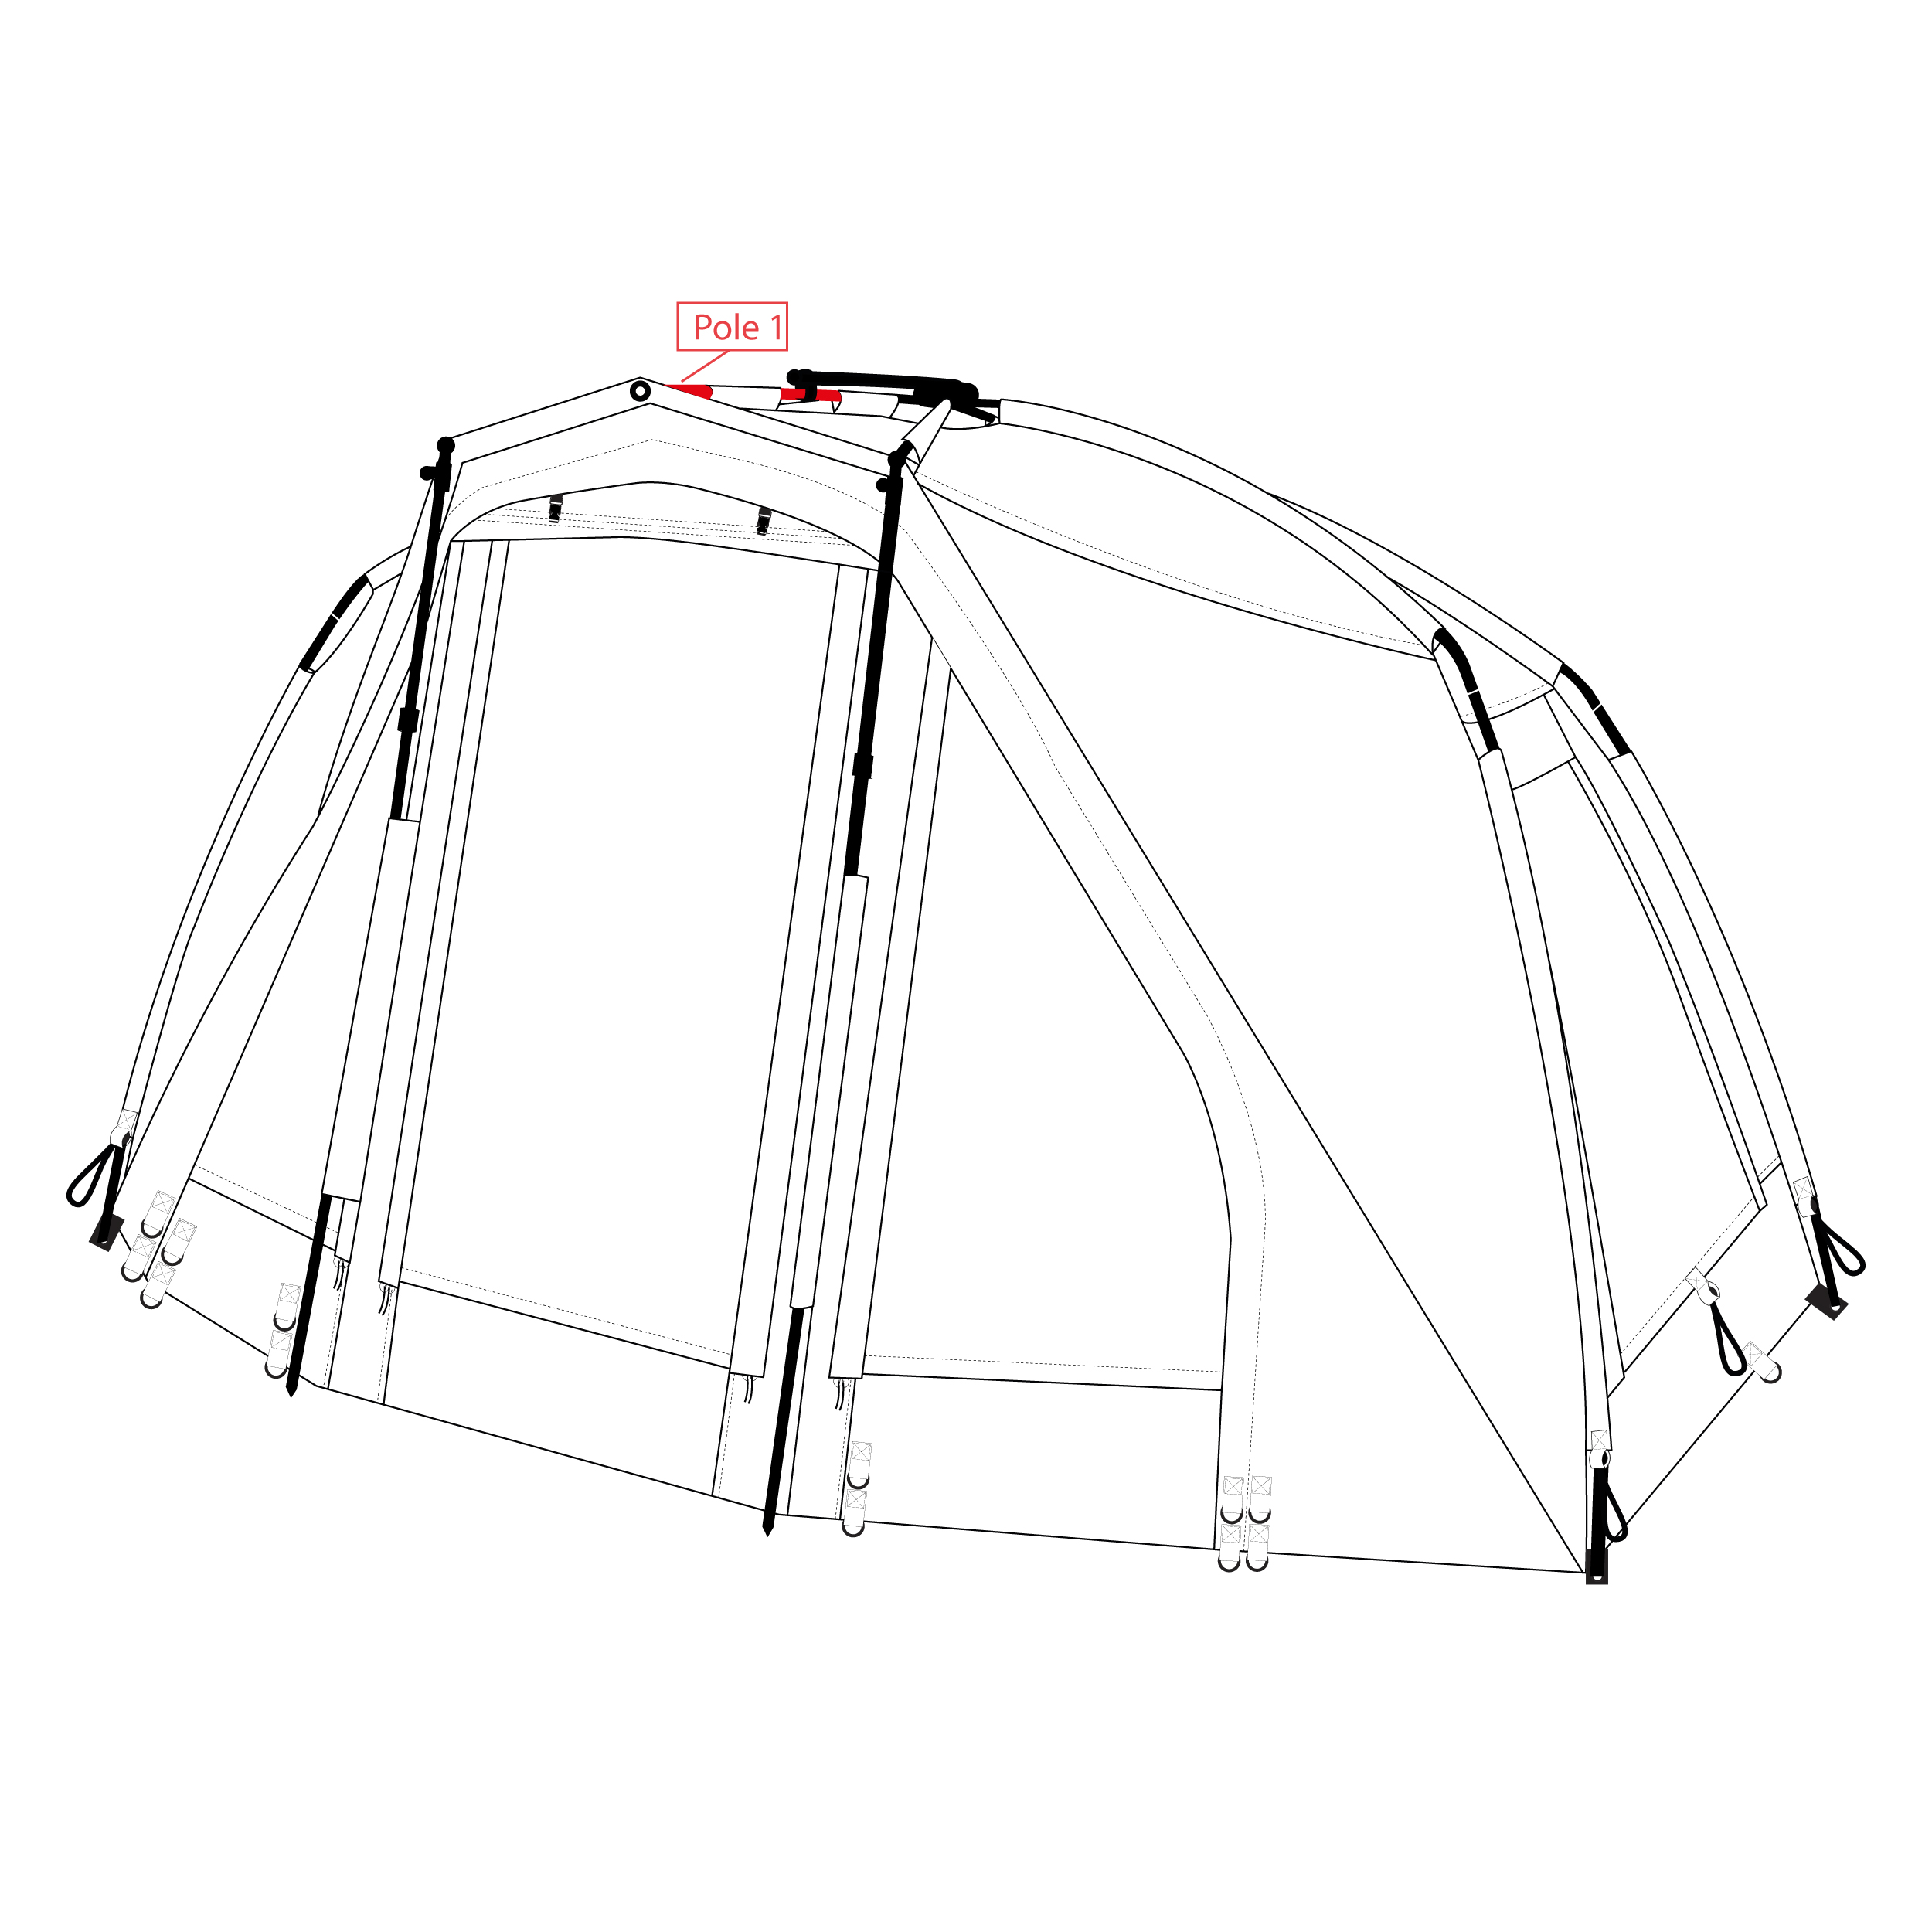 Tempest Pole 1 – Brolly 100T (C)